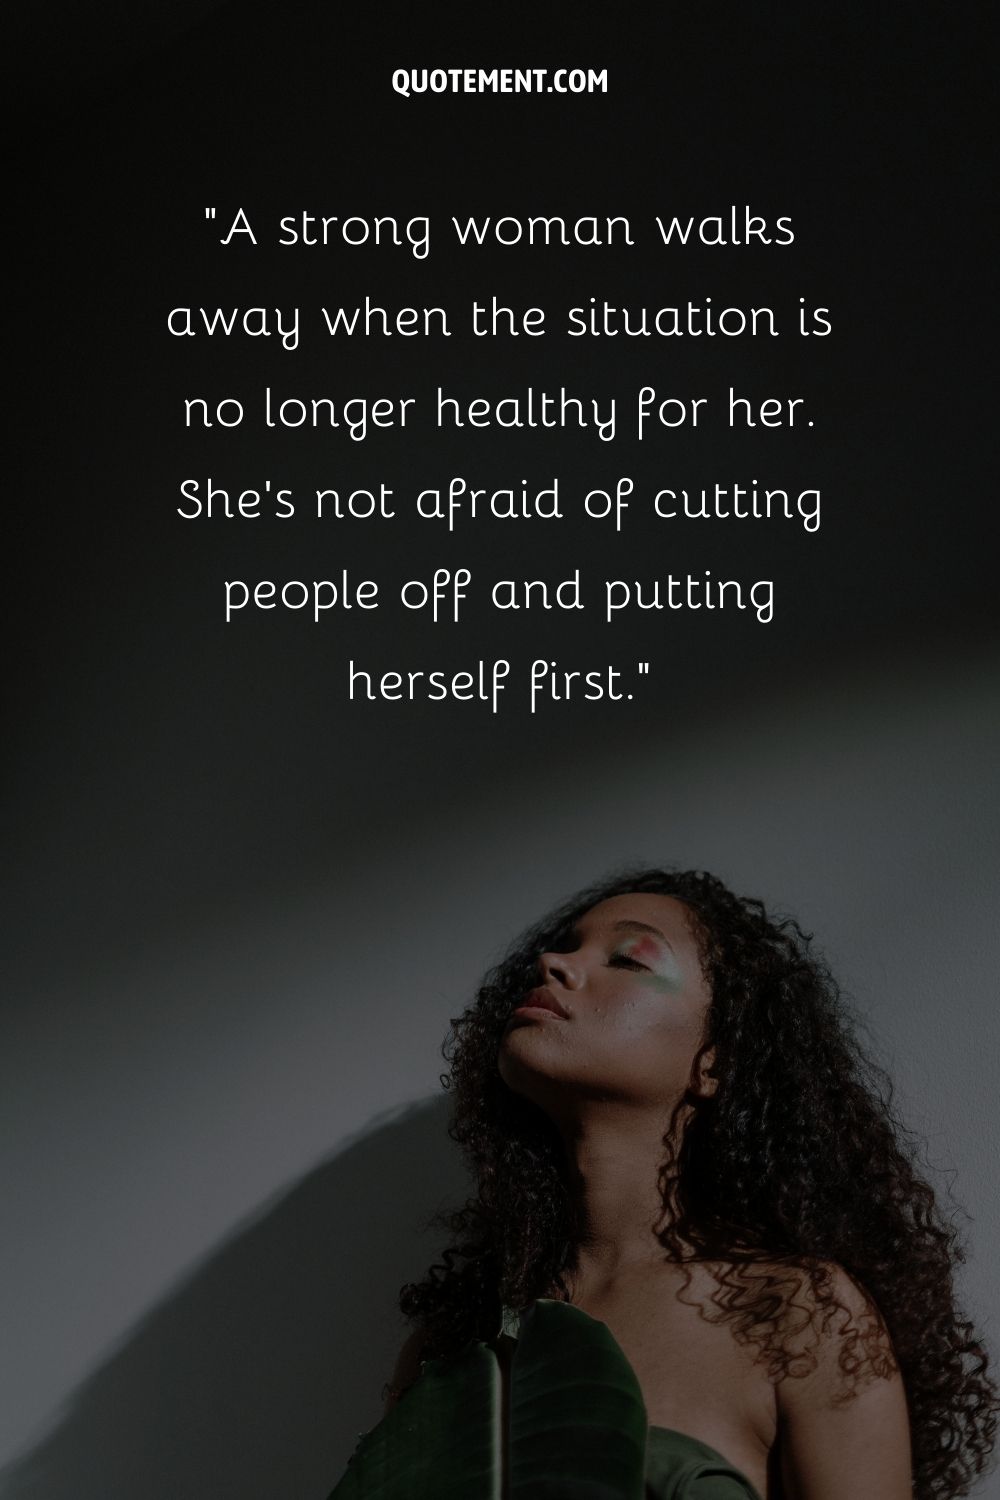 a woman with naturally curly hair representing relationship walk away quote